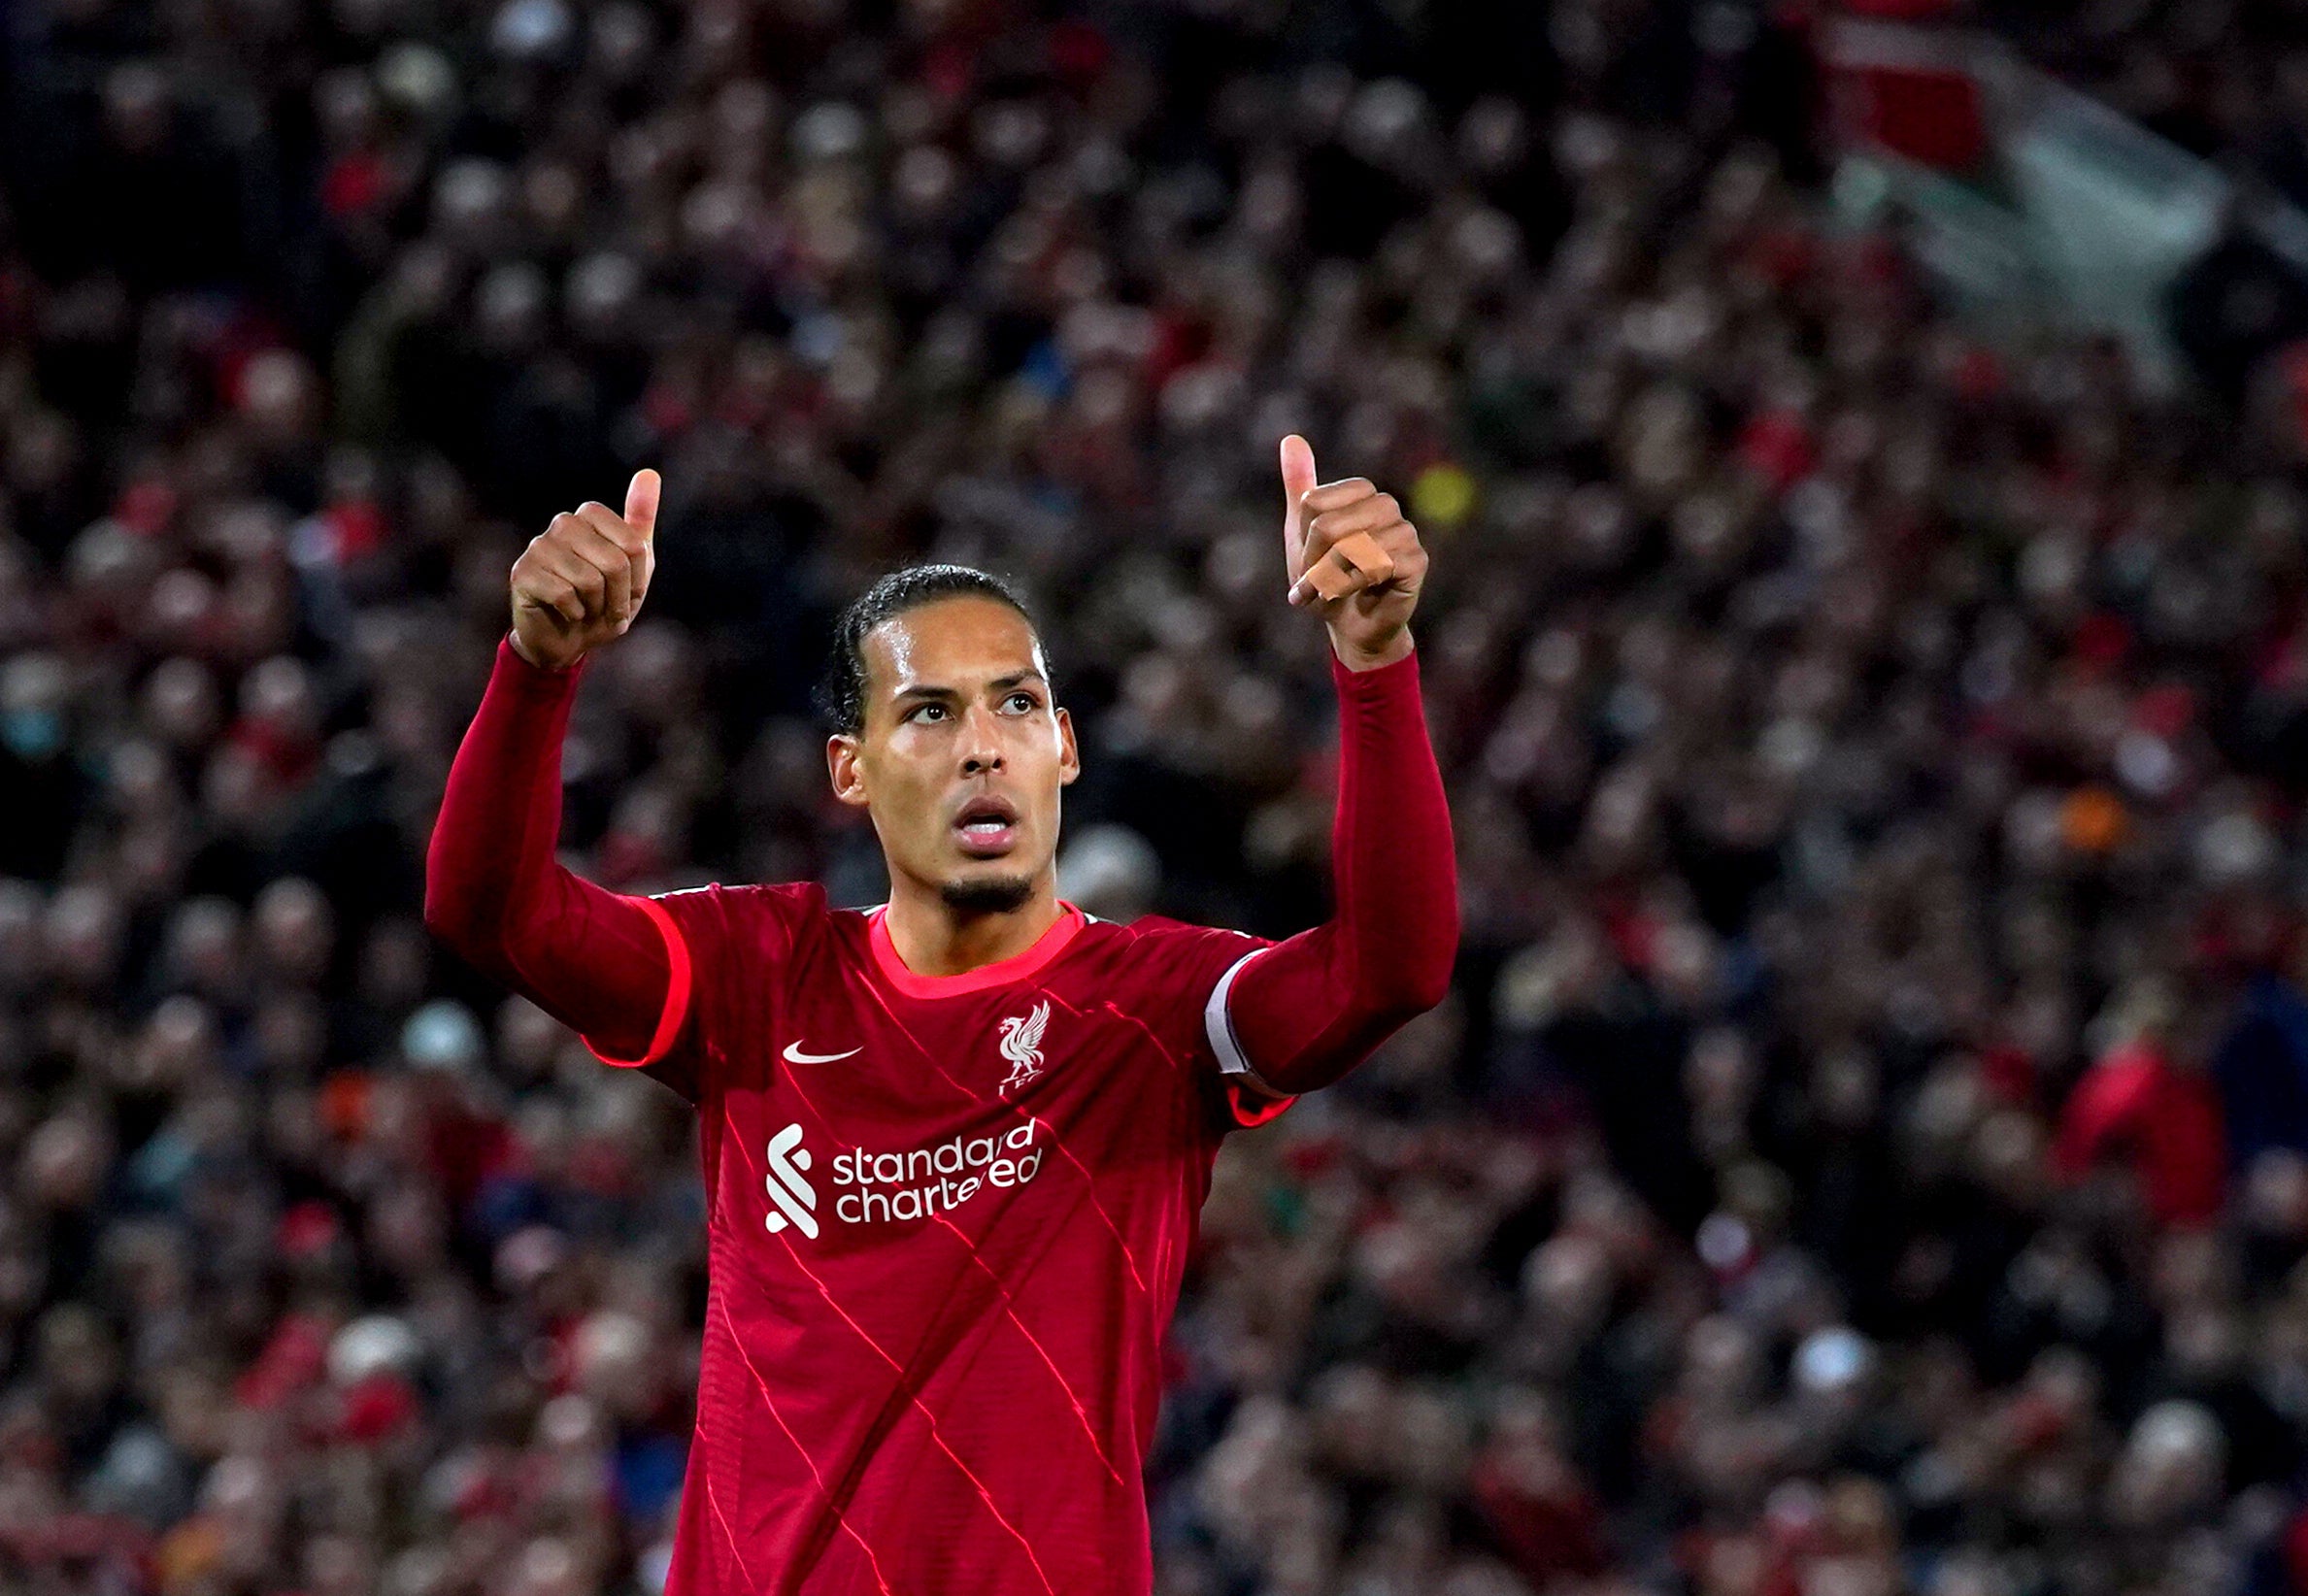 Liverpool defender Virgil Van Dijk admits the quadruple is “almost impossible” but he is enjoying the experience (Peter Byrne/PA)